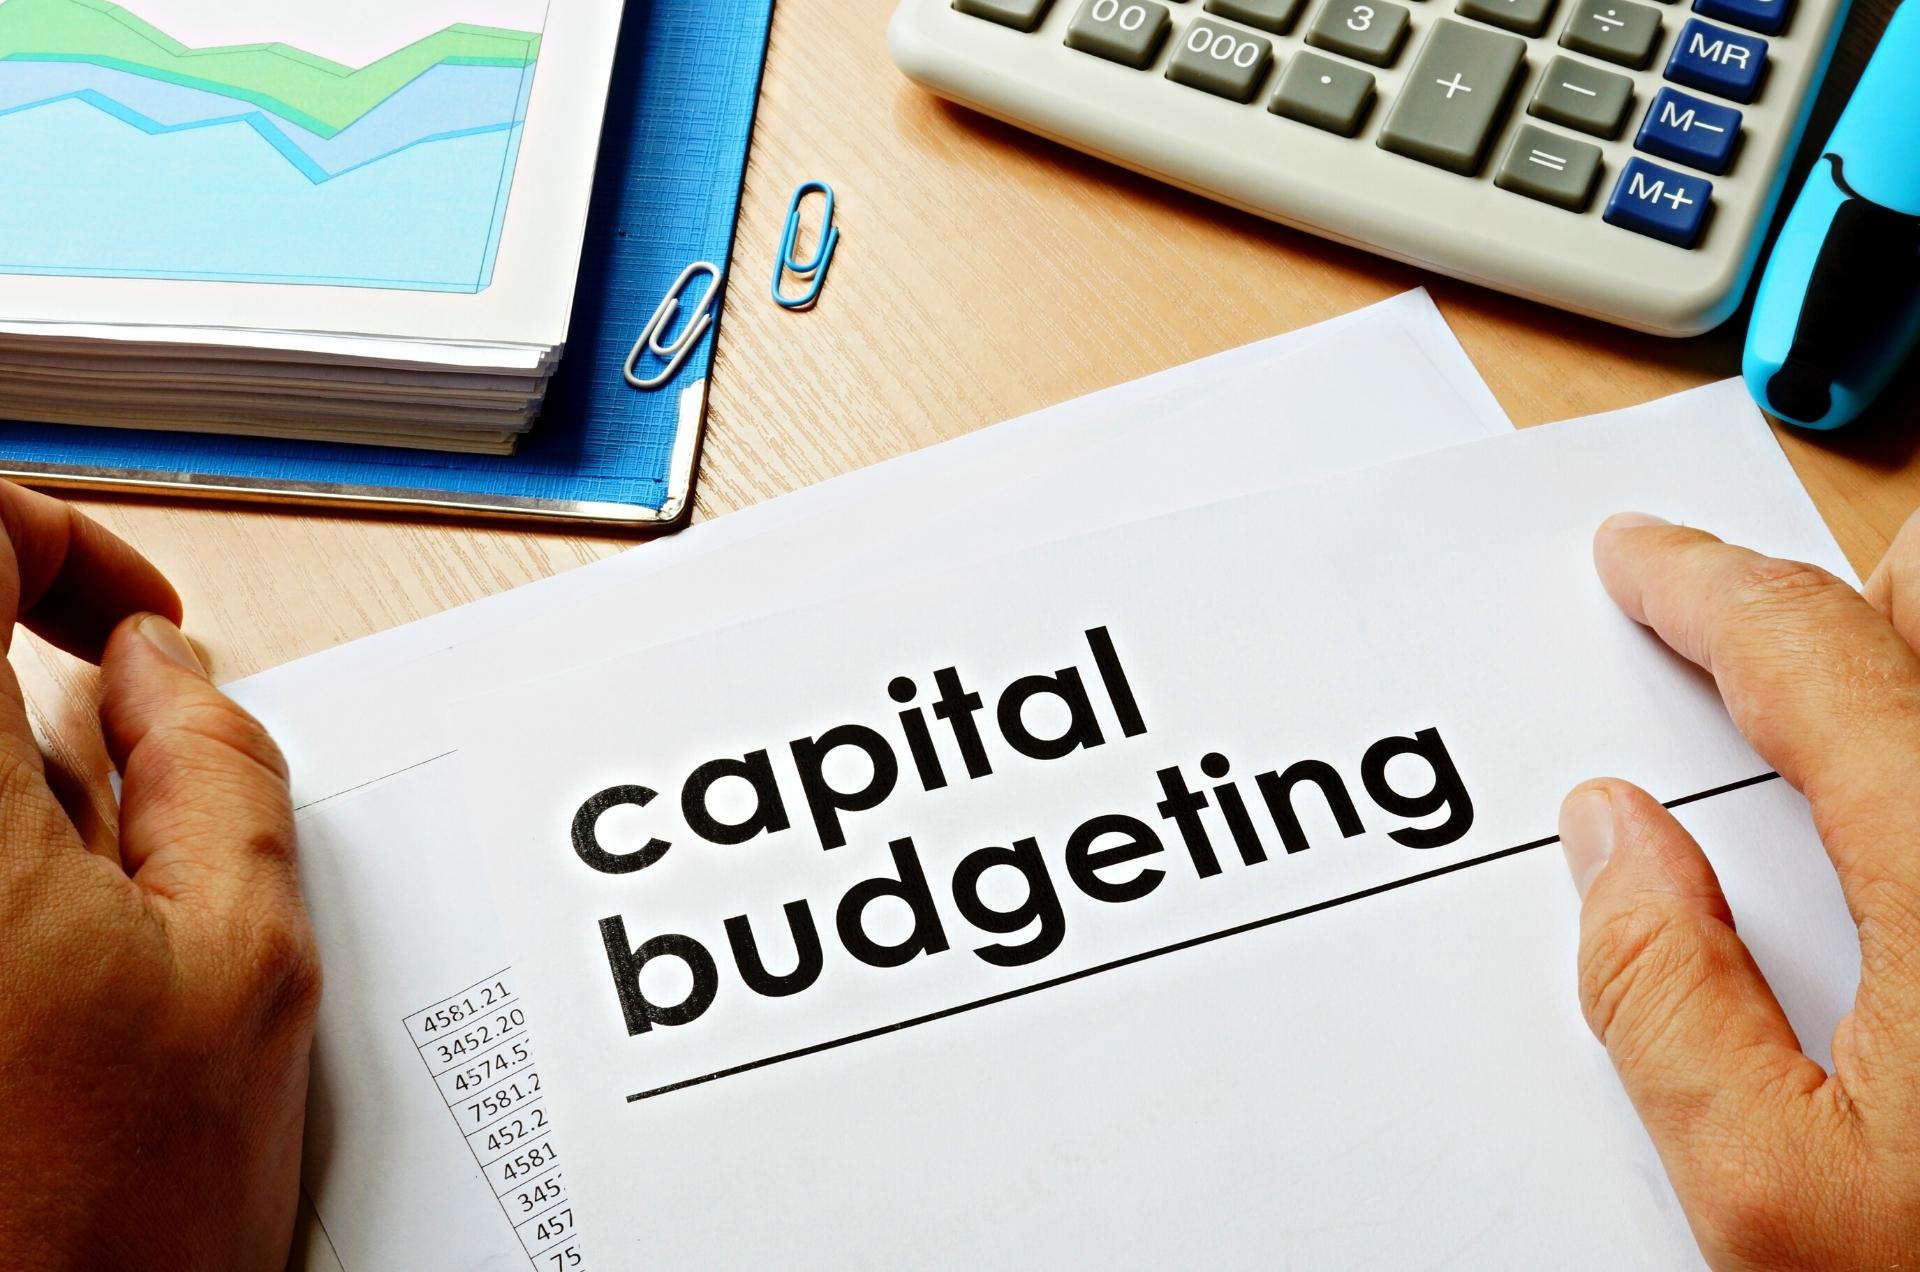 Capital budgeting is the process of allocating an organization's cash for future operational needs. Every organization has a capital budget.